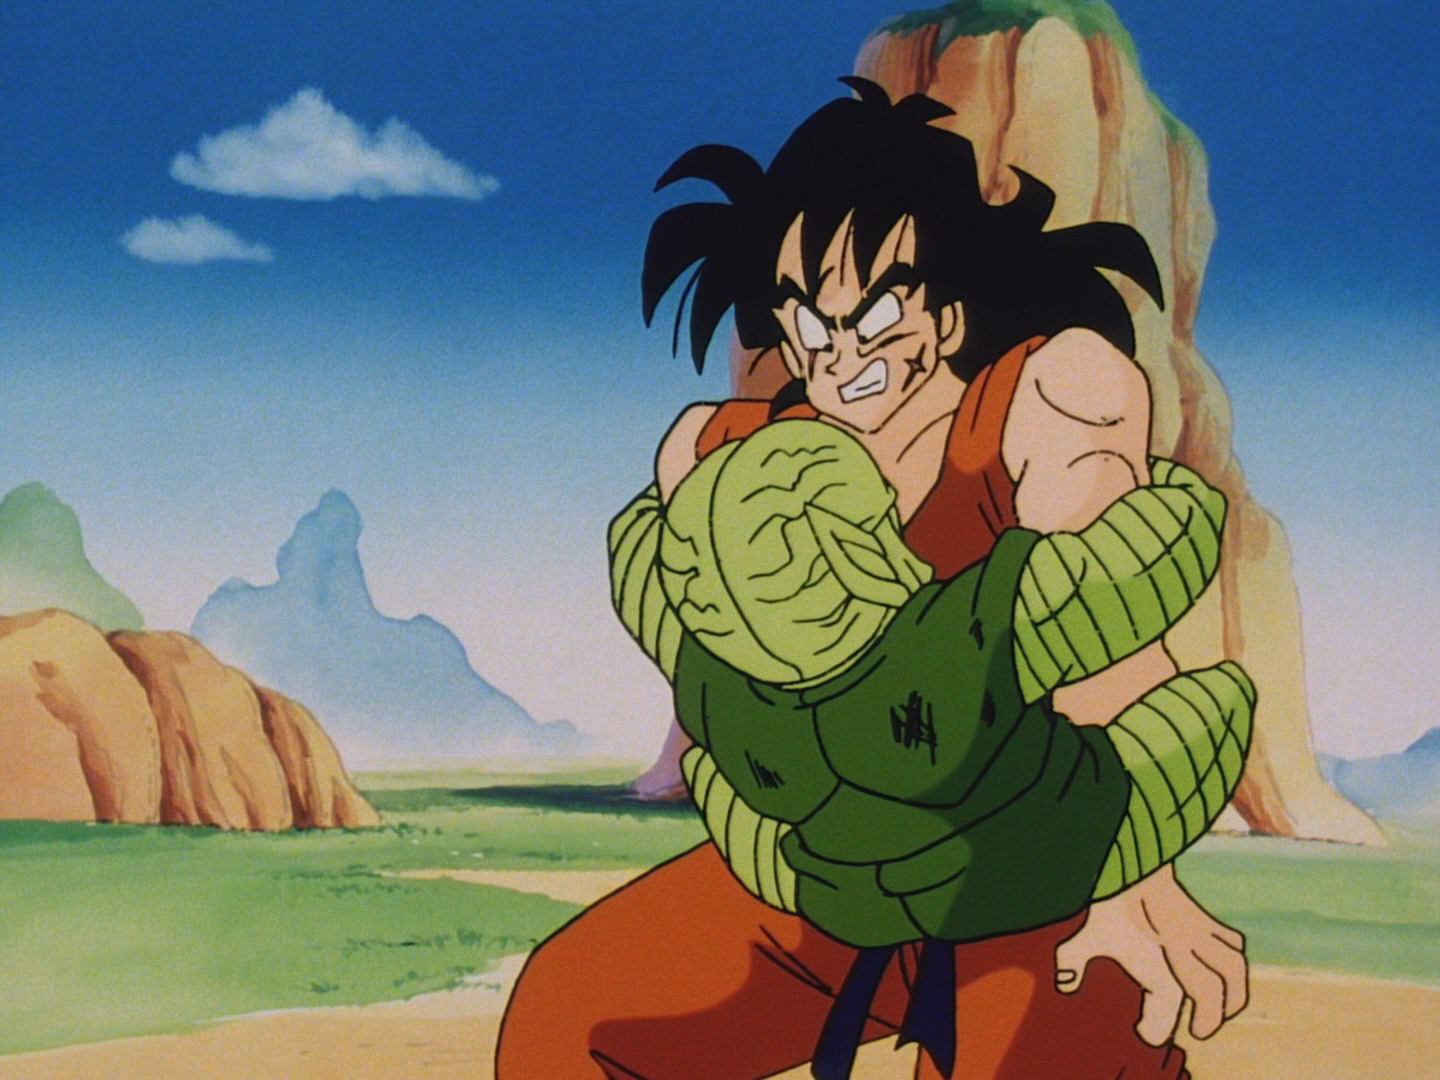 Yamcha caught up at the end though. 